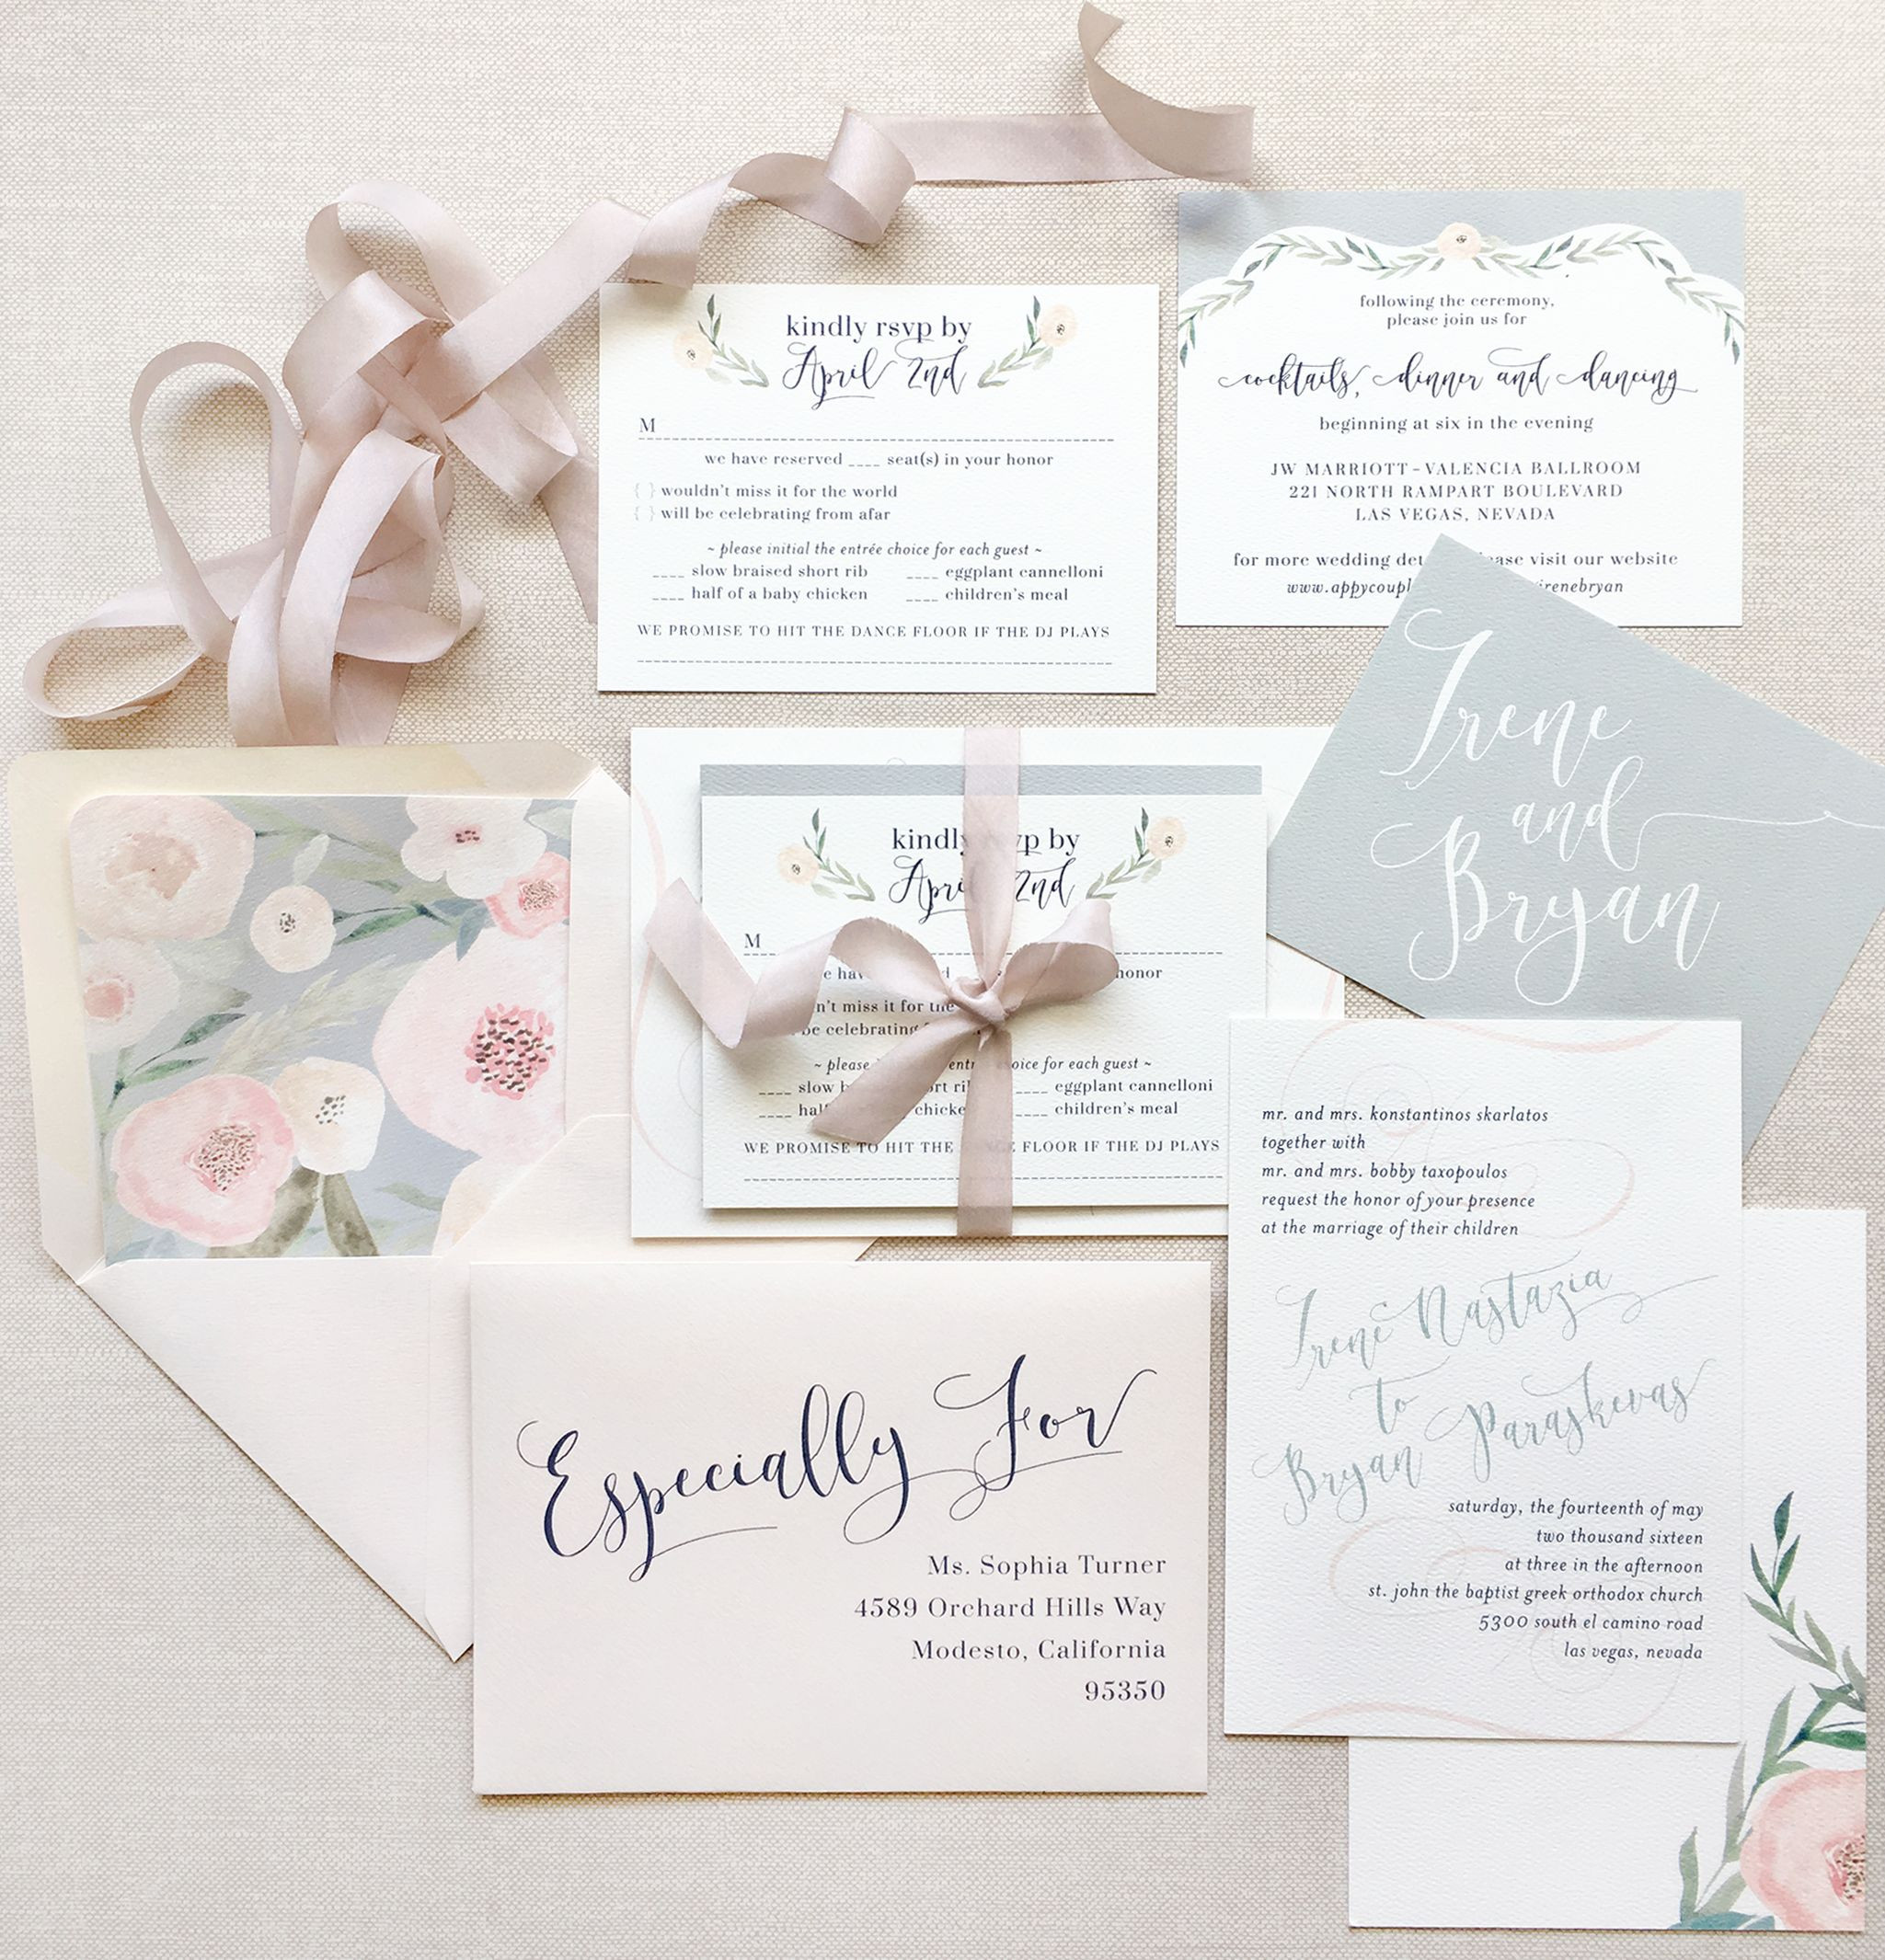 Top 21 One Of A Kind Wedding Invitations Home, Family, Style and Art